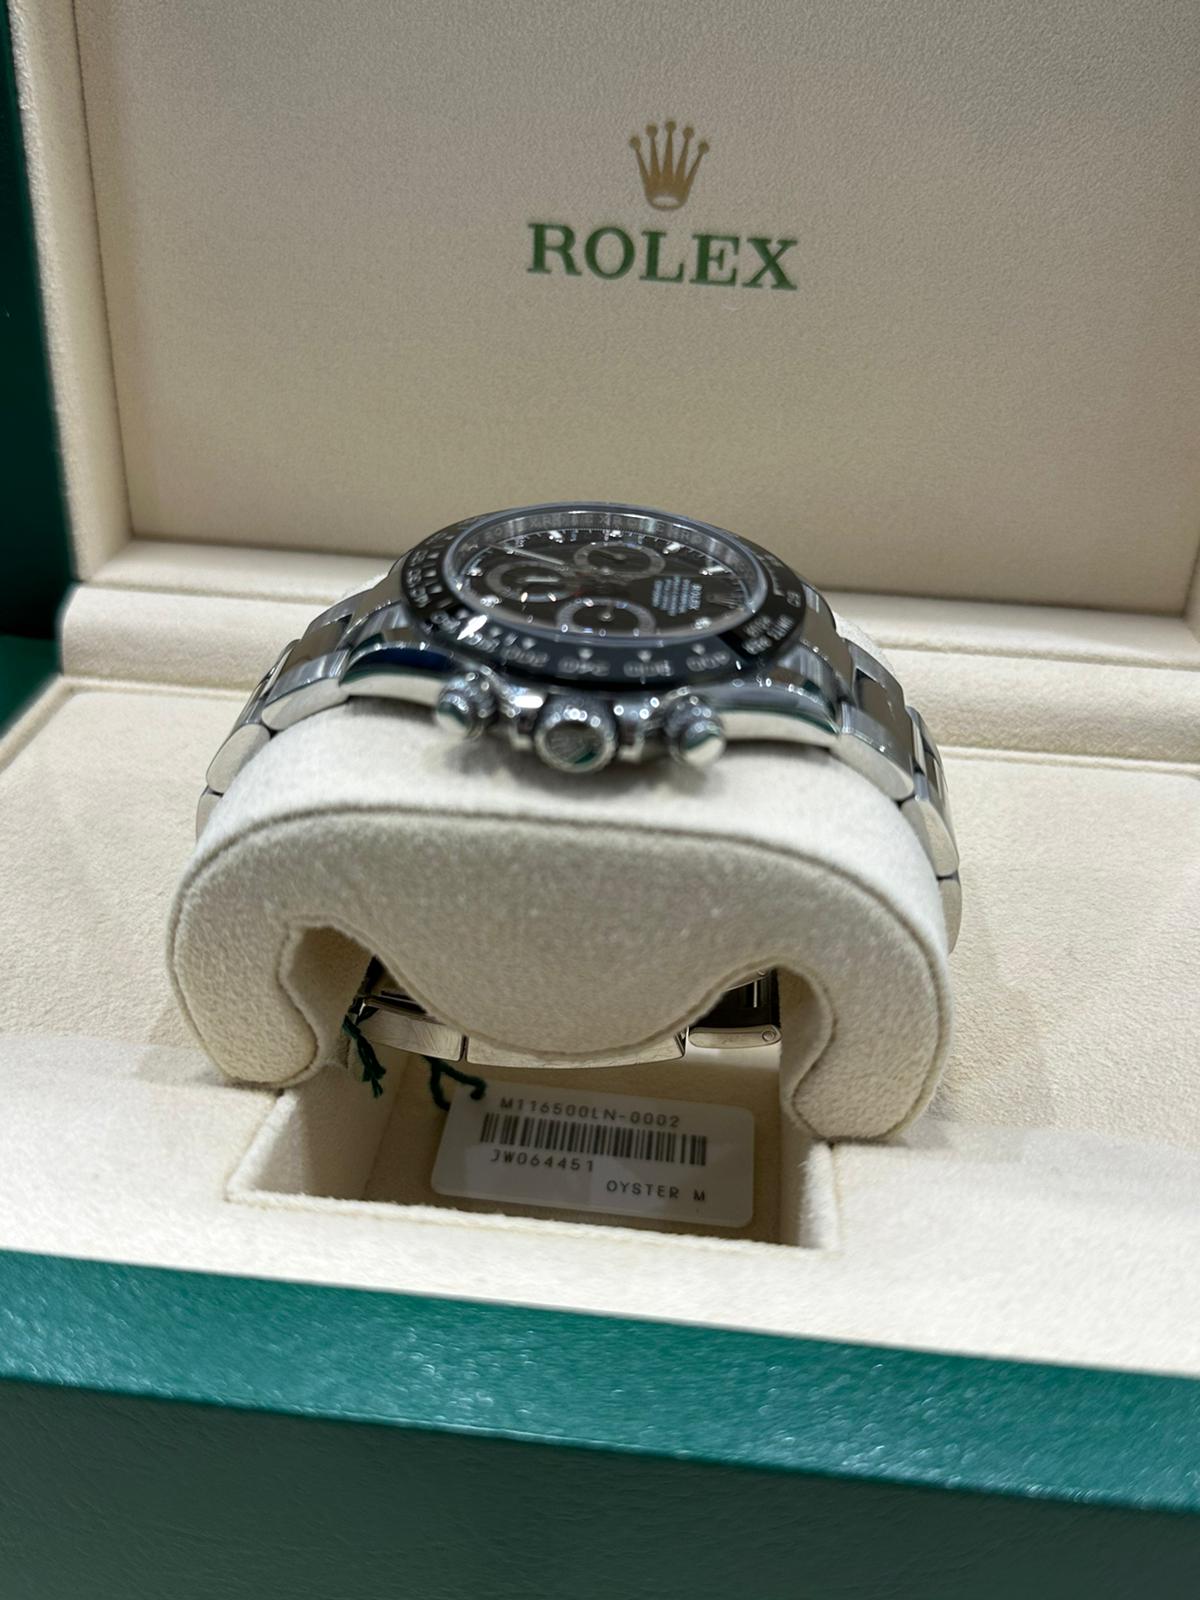 Rolex Daytona Ceramic Black 116500LN 2020 complete with box and papers - Image 2 of 8